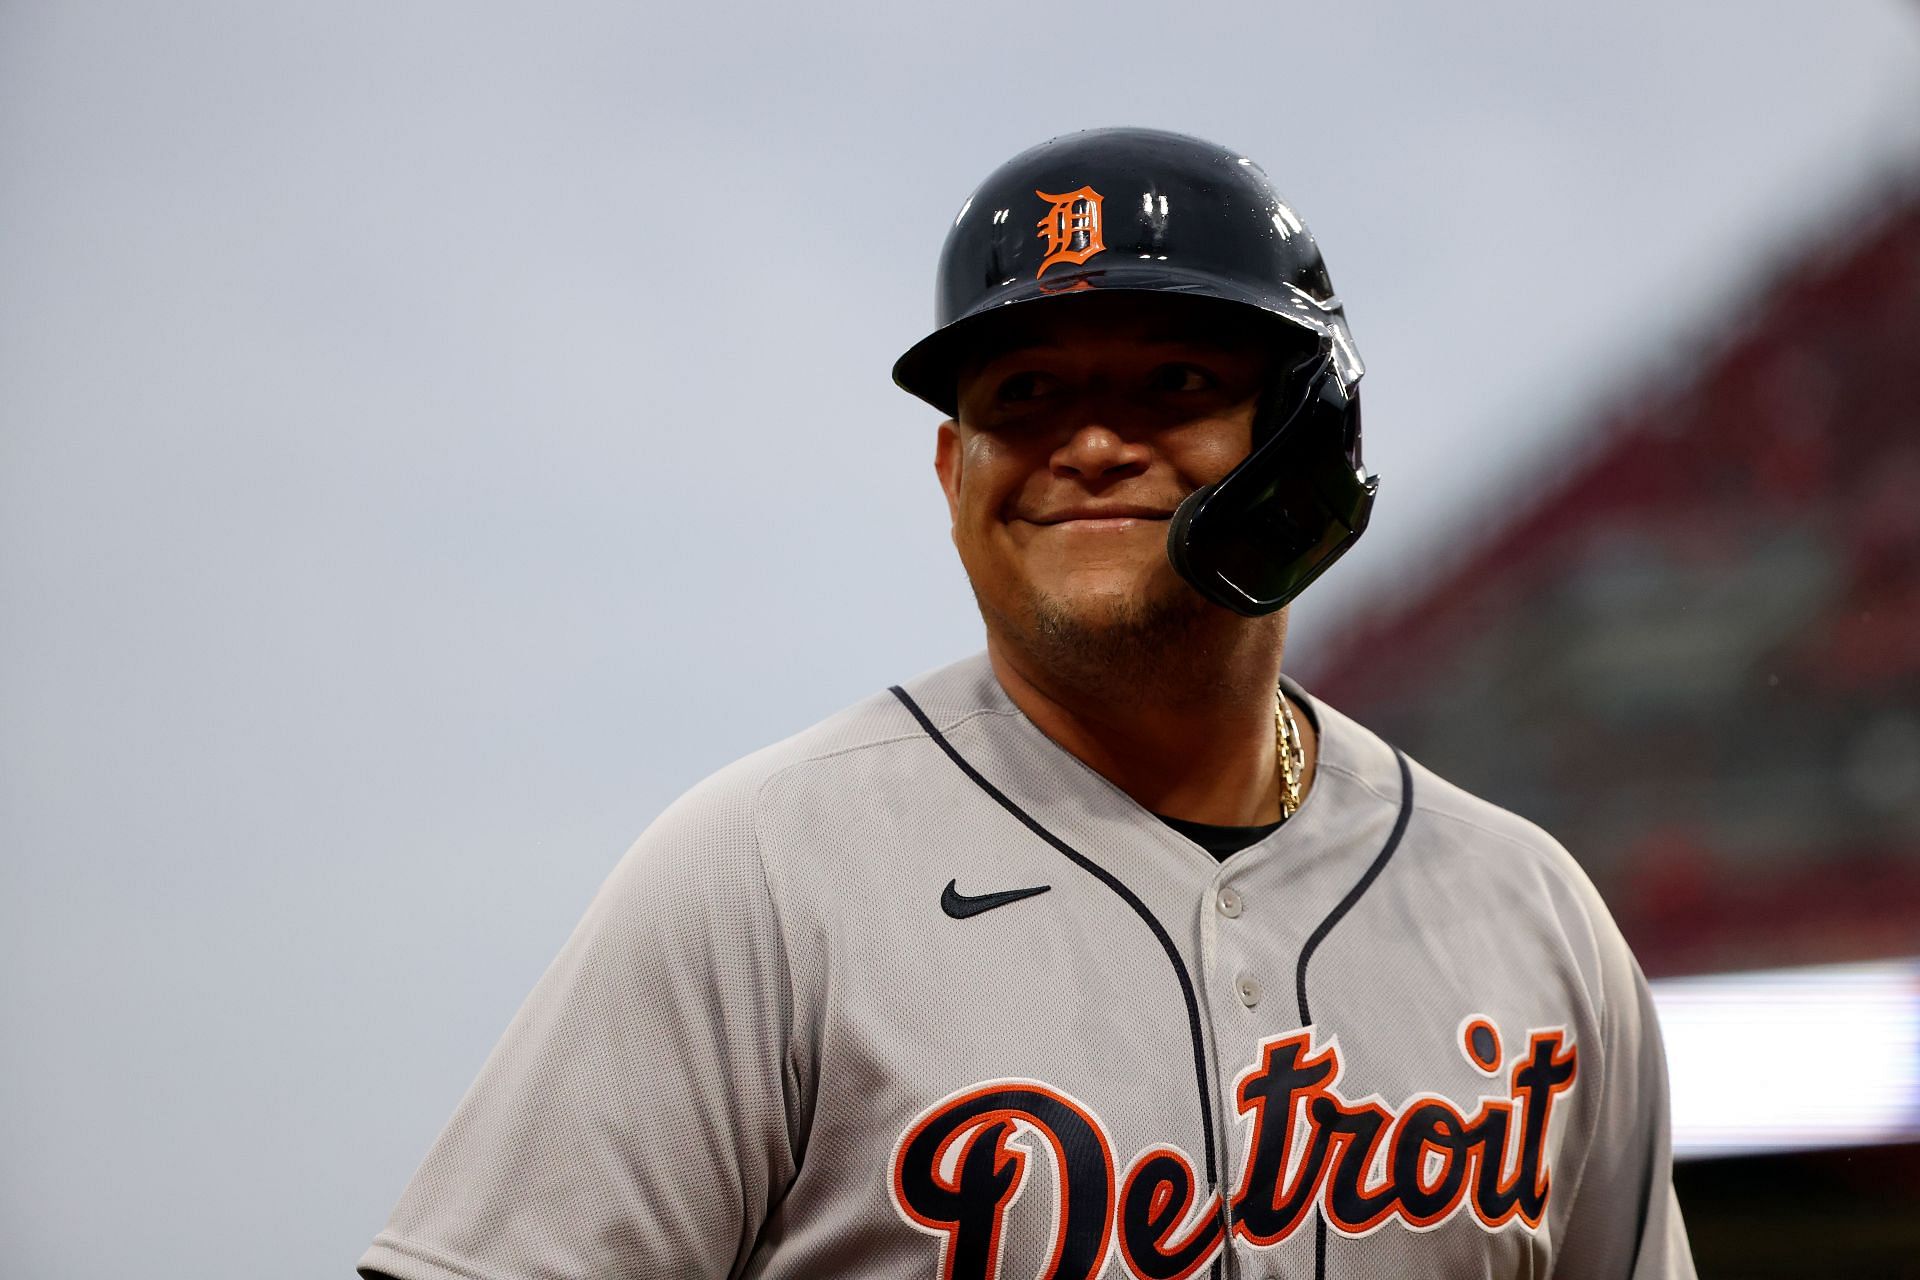 Next up for Miguel Cabrera: The 3,000 hit club 